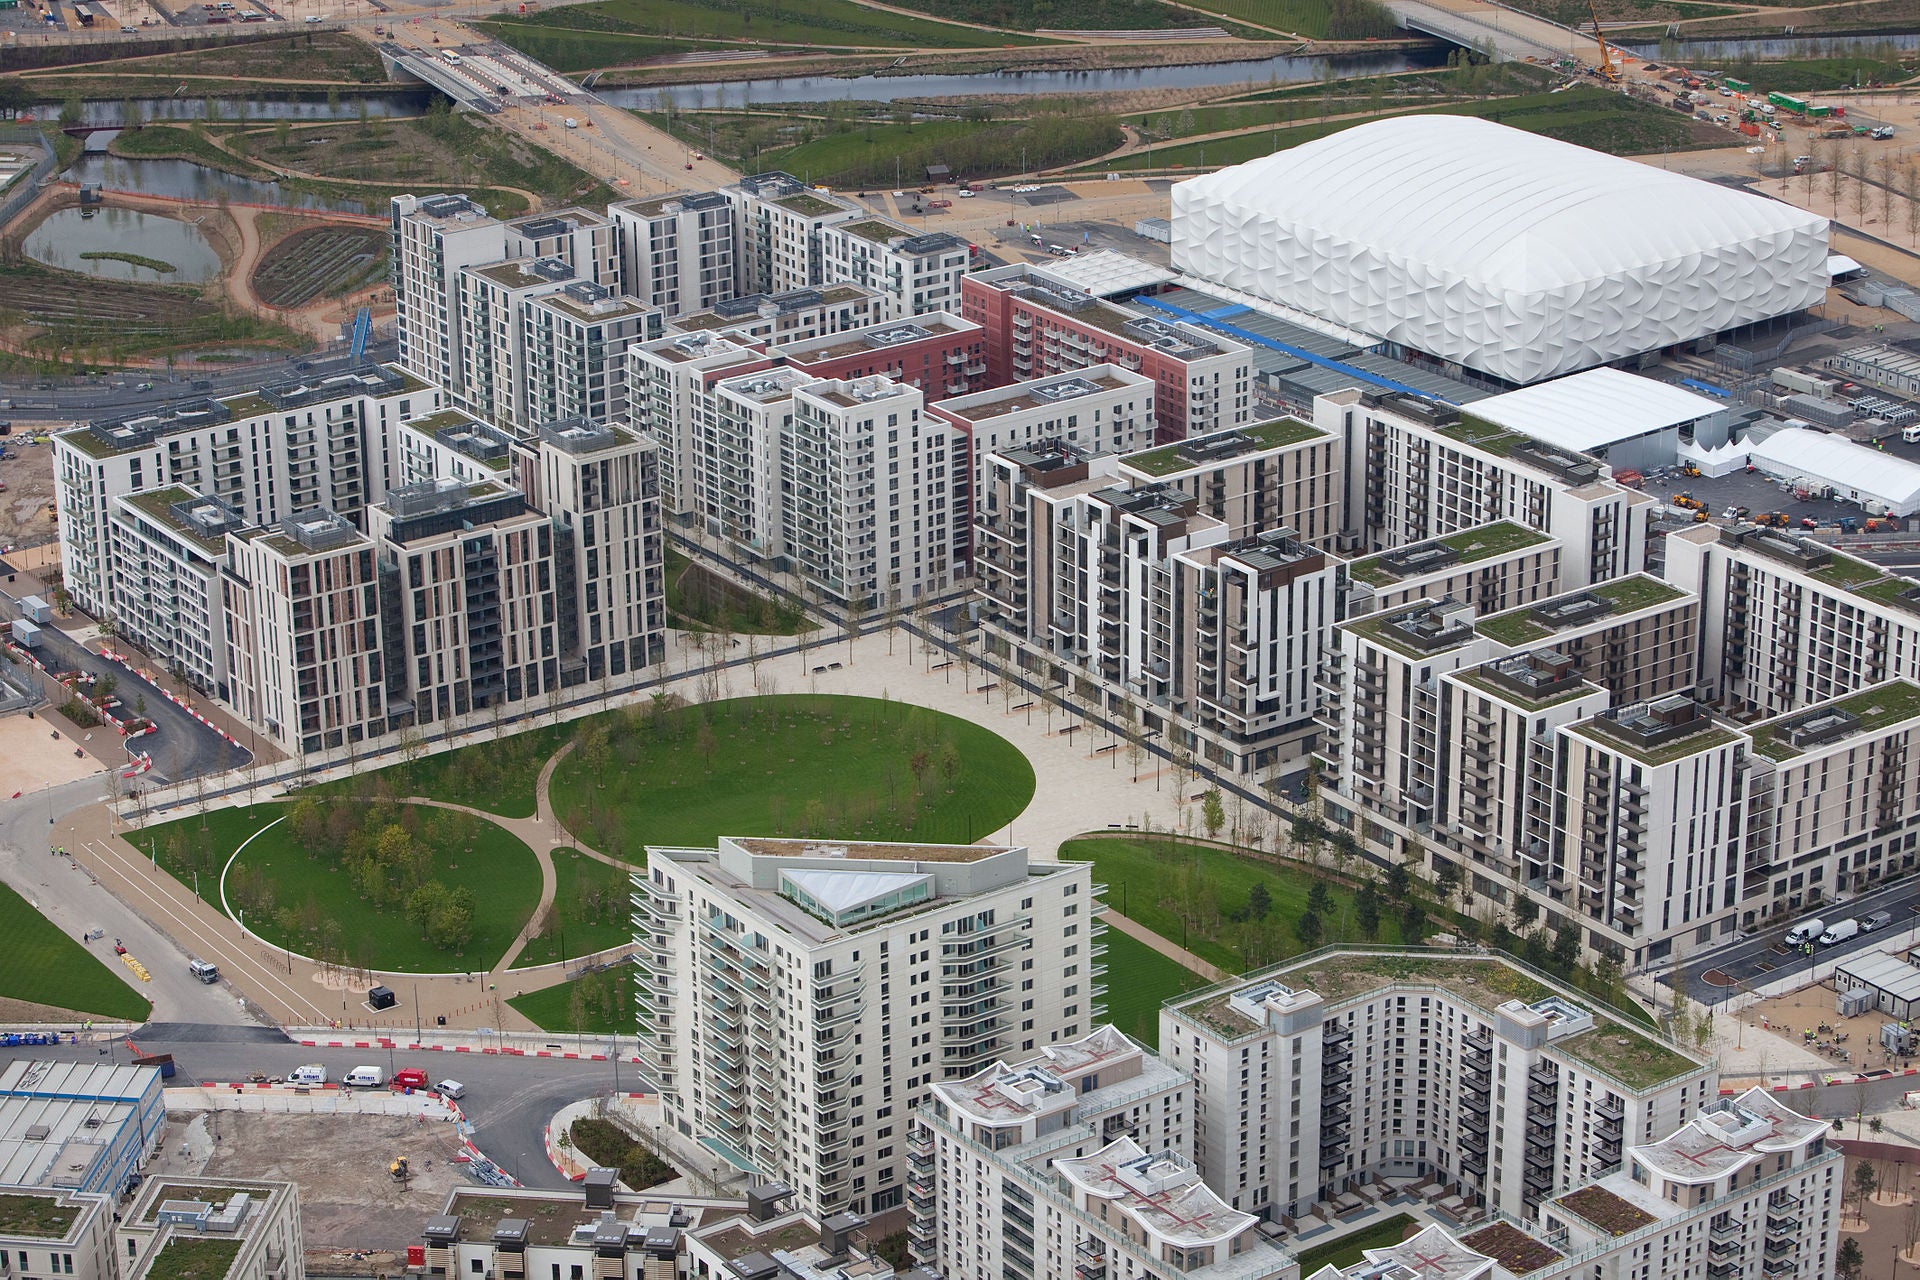 A new development in the Olympic Park, where Chomham Manor is located